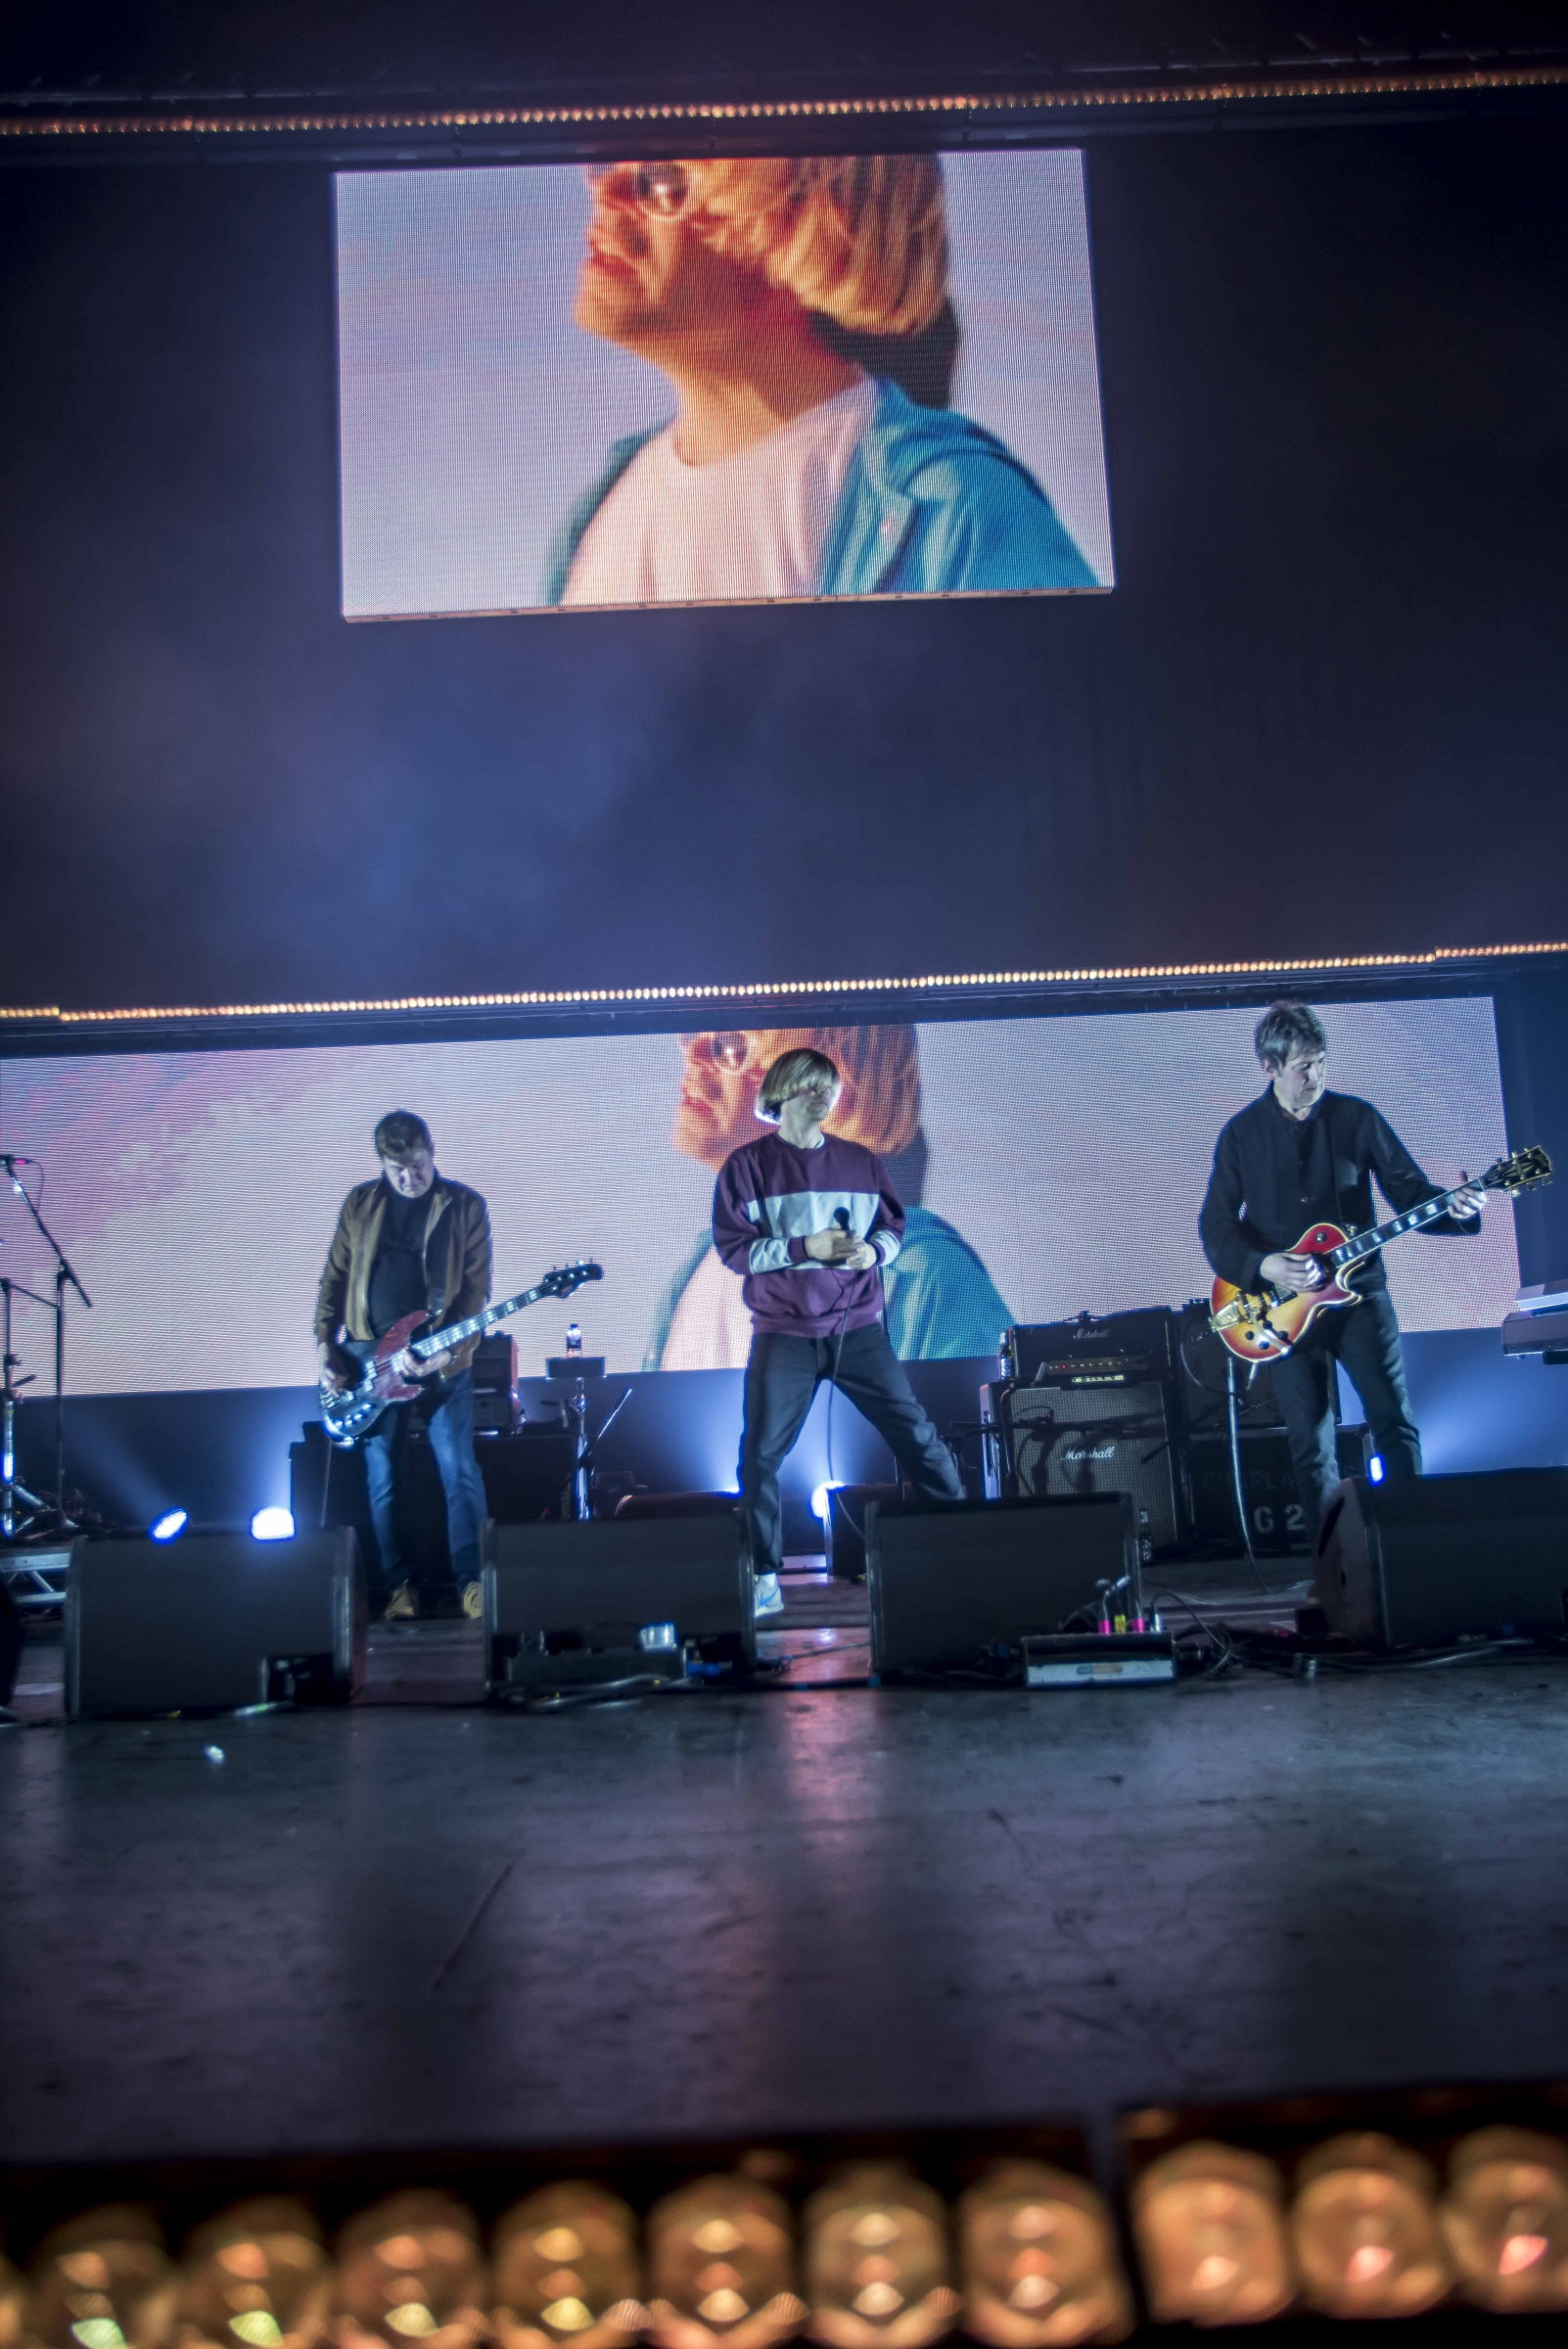 The Charlatans image by Chris Payne